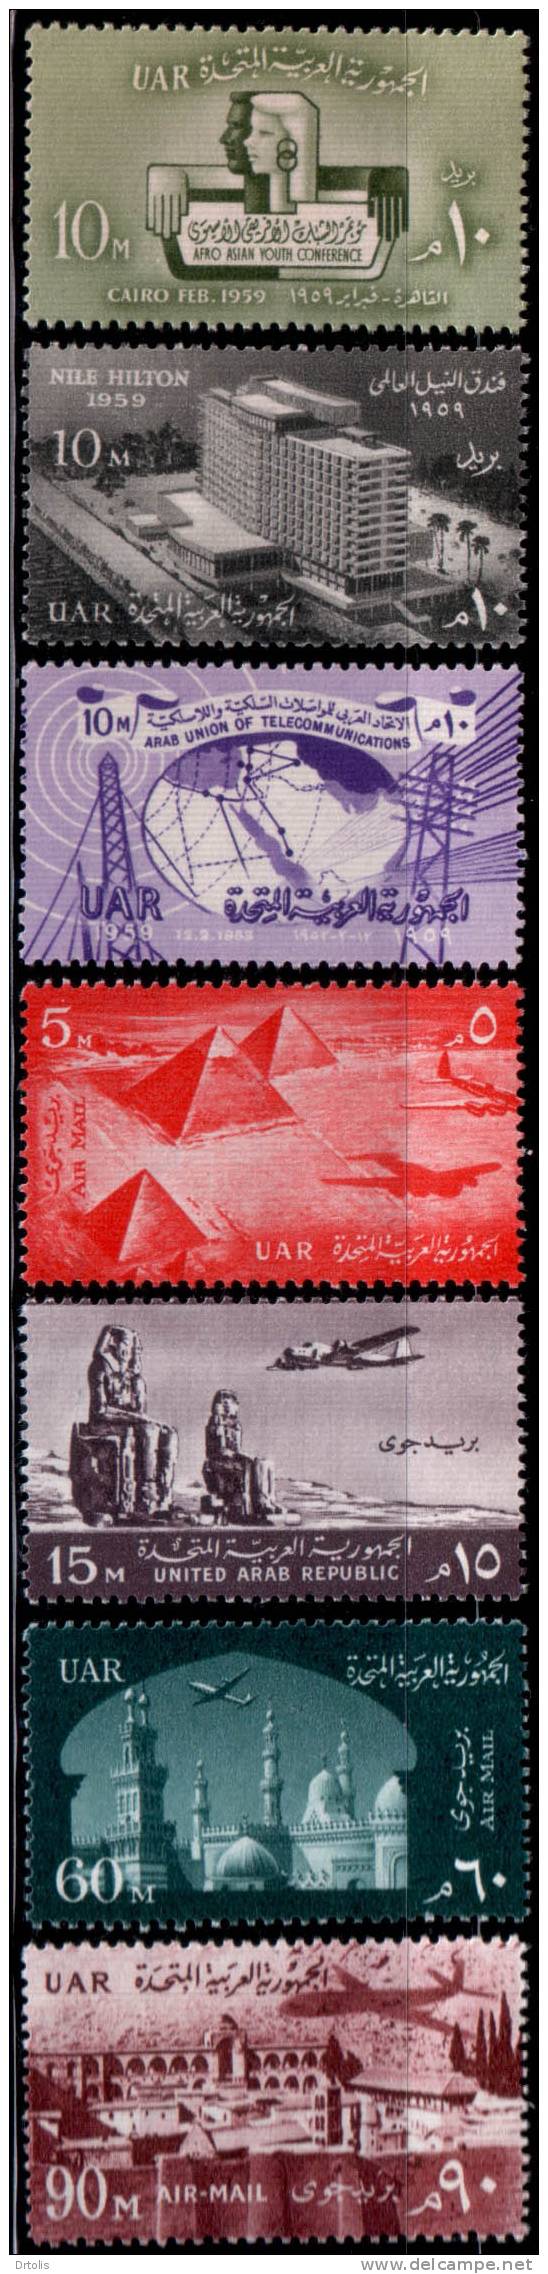 EGYPT / 1959 /  COMPLETE YEAR ISSUES / MNH / VF / 7 SCANS . - Nuevos